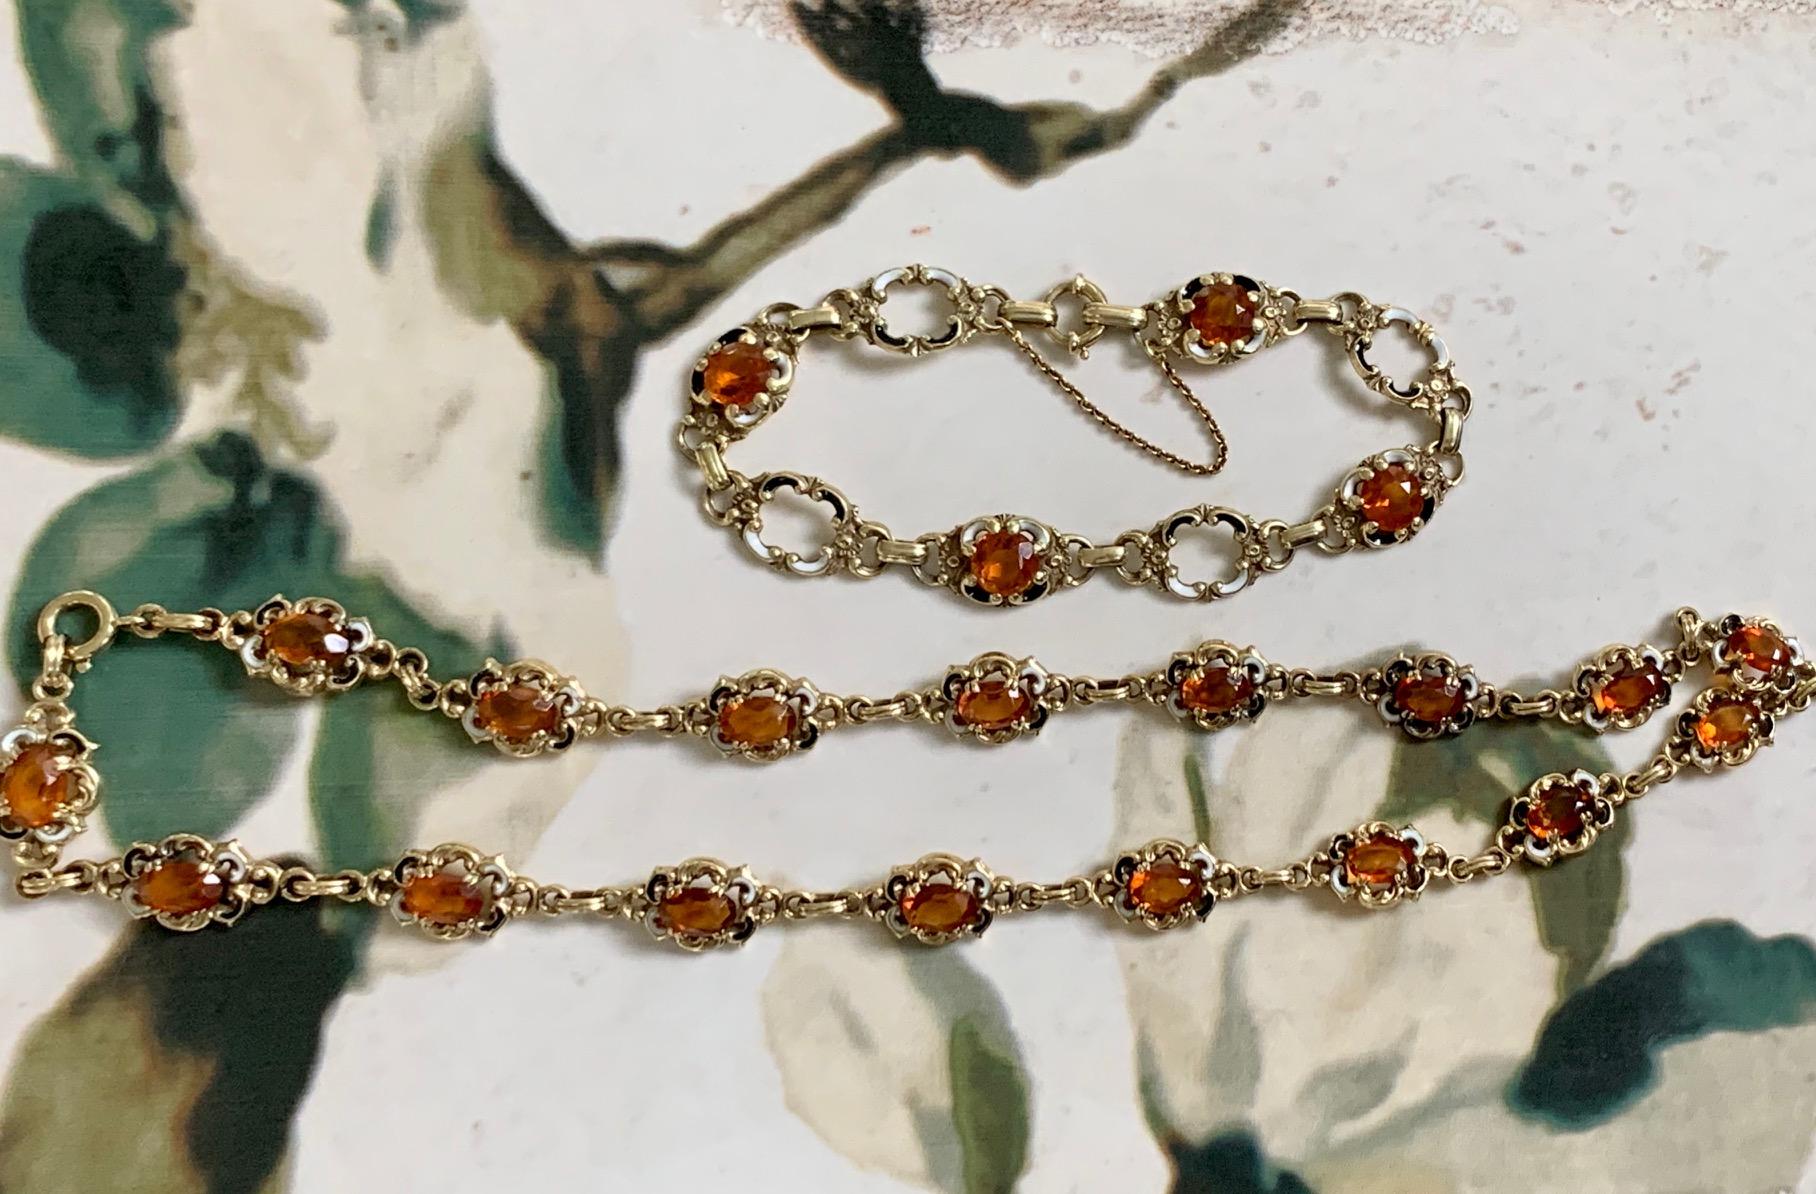 This beautiful set of vintage 14k Yellow gold Citrine necklace and bracelet feature one link of of 7 x 5mm oval faceted Citrine with white and black enameling.  

This bracelet and necklace contains one 7 x 5mm oval faceted Citrine with white and